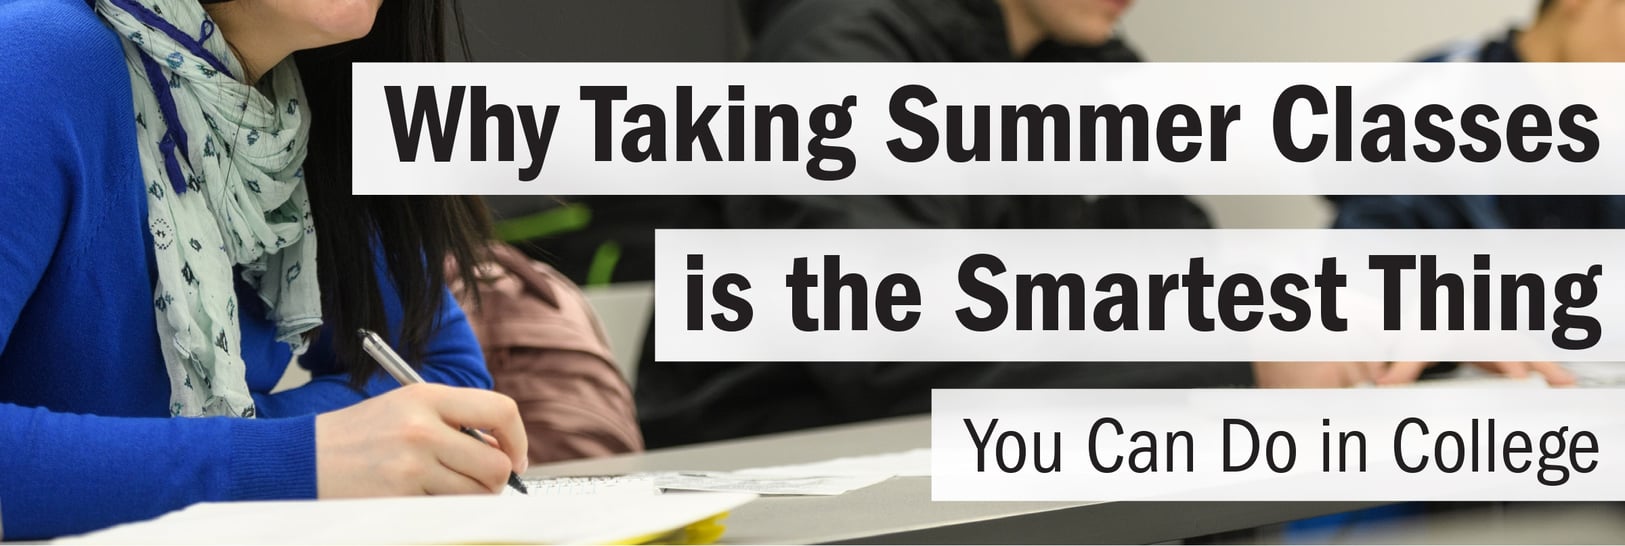 Why Taking Summer Classes is the Smartest Thing You Can Do in College